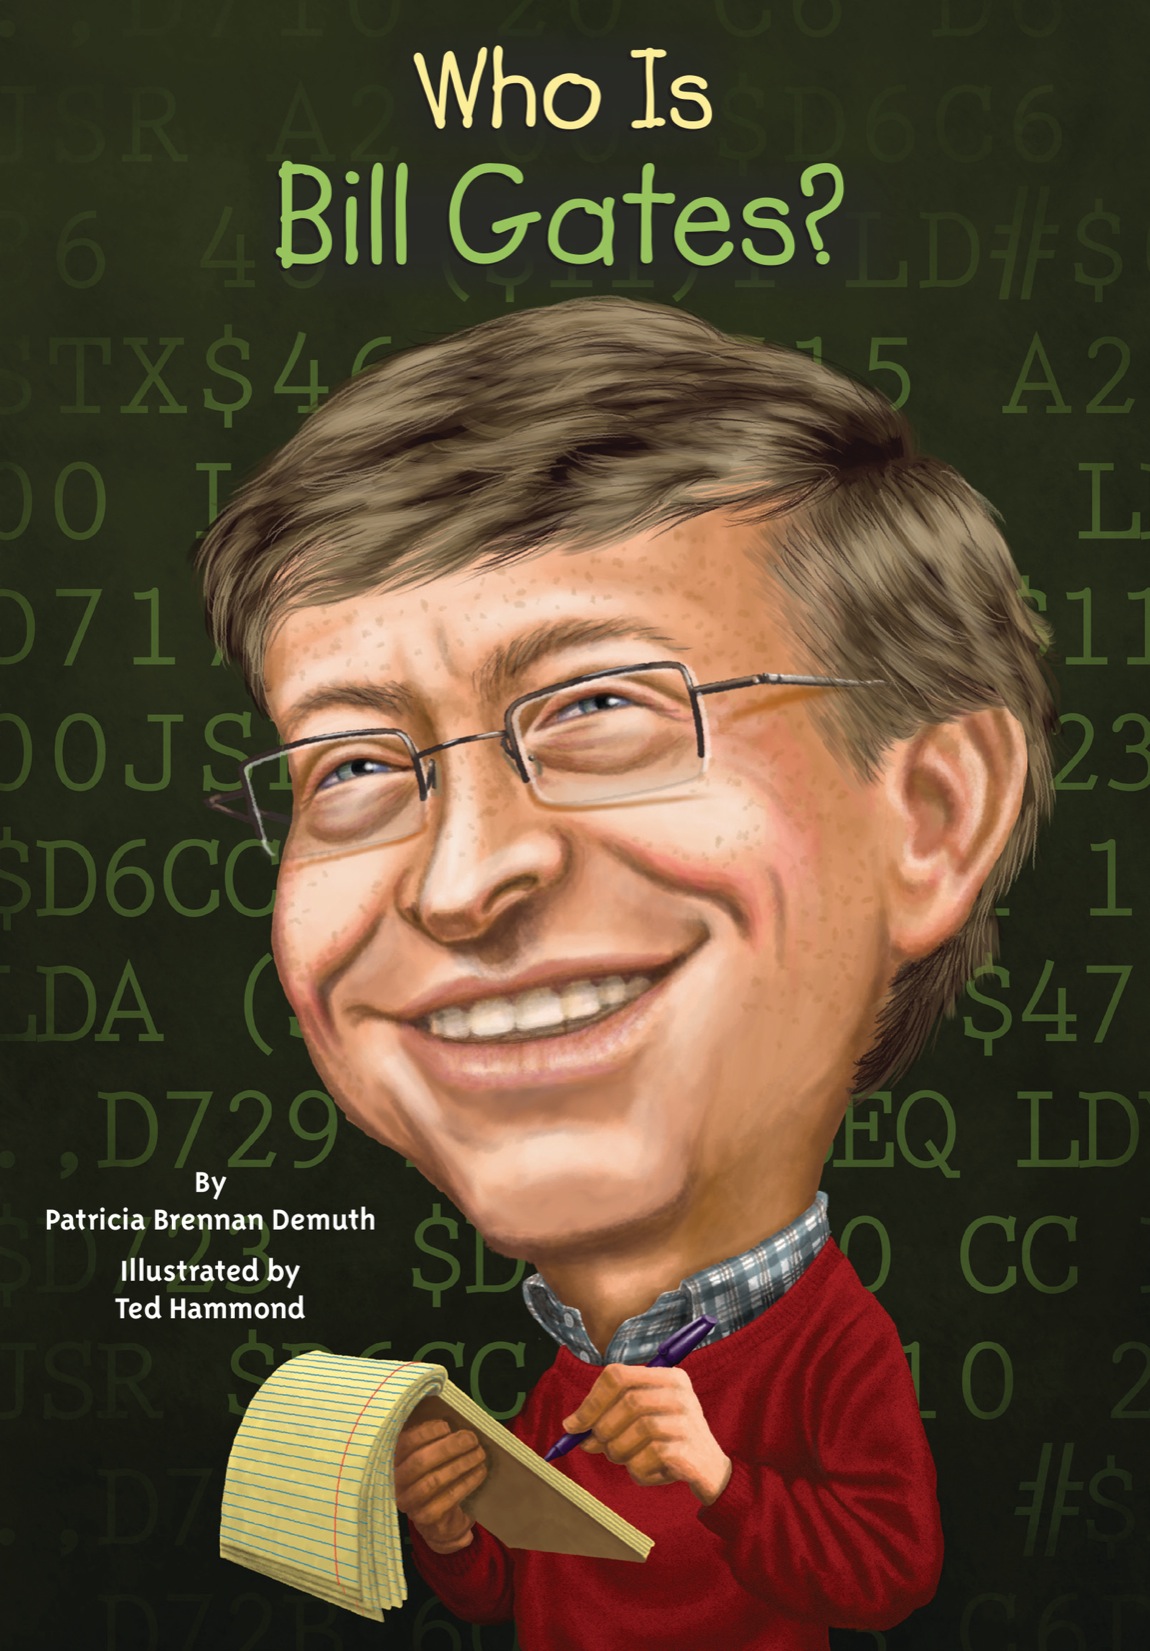 Who Is Bill Gates By Patricia Brennan Demuth Illustrated by Ted Hammond - photo 1